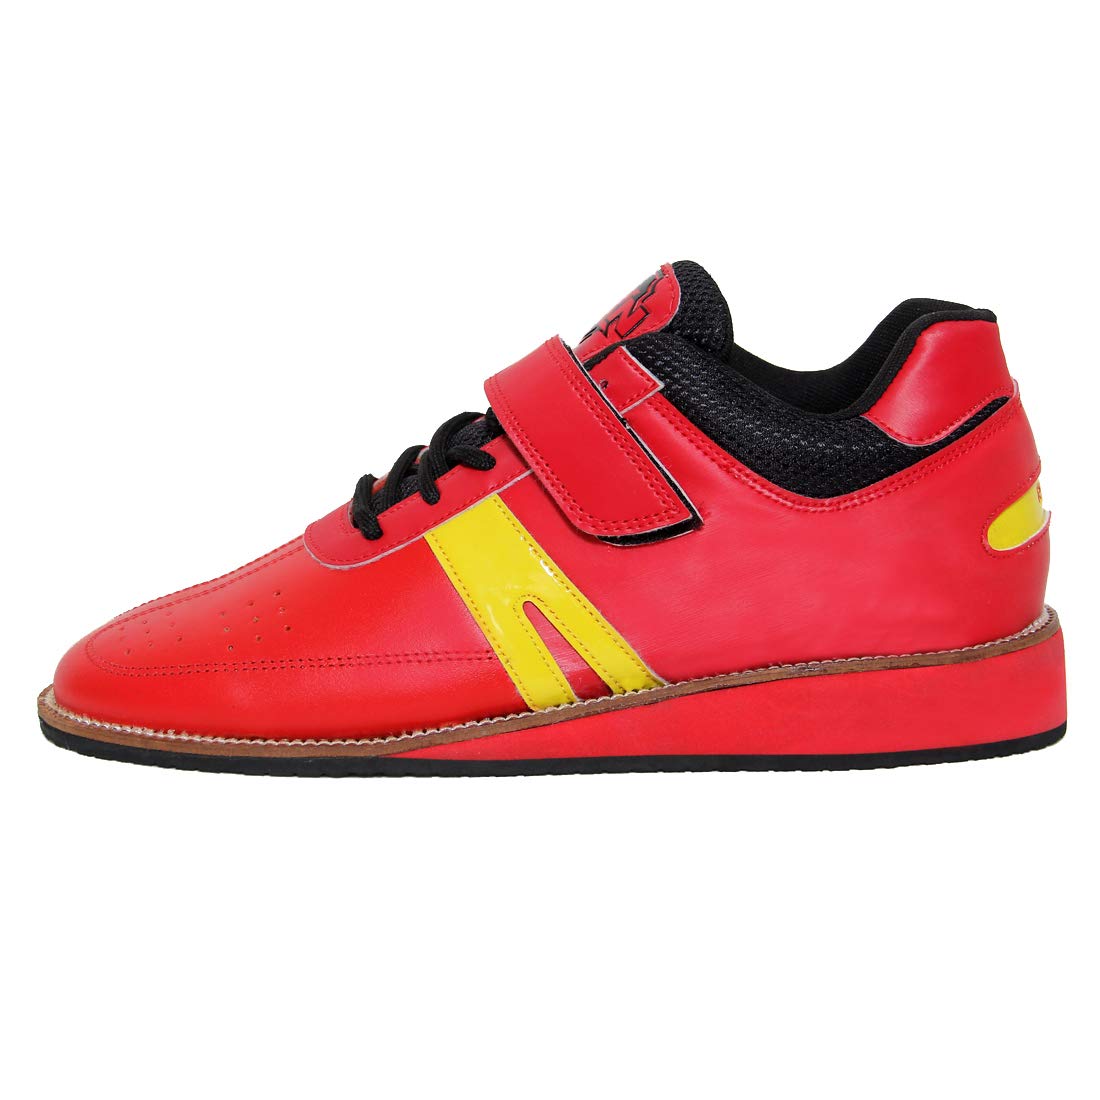 RXN WLS1 Red Weightlifting Shoe